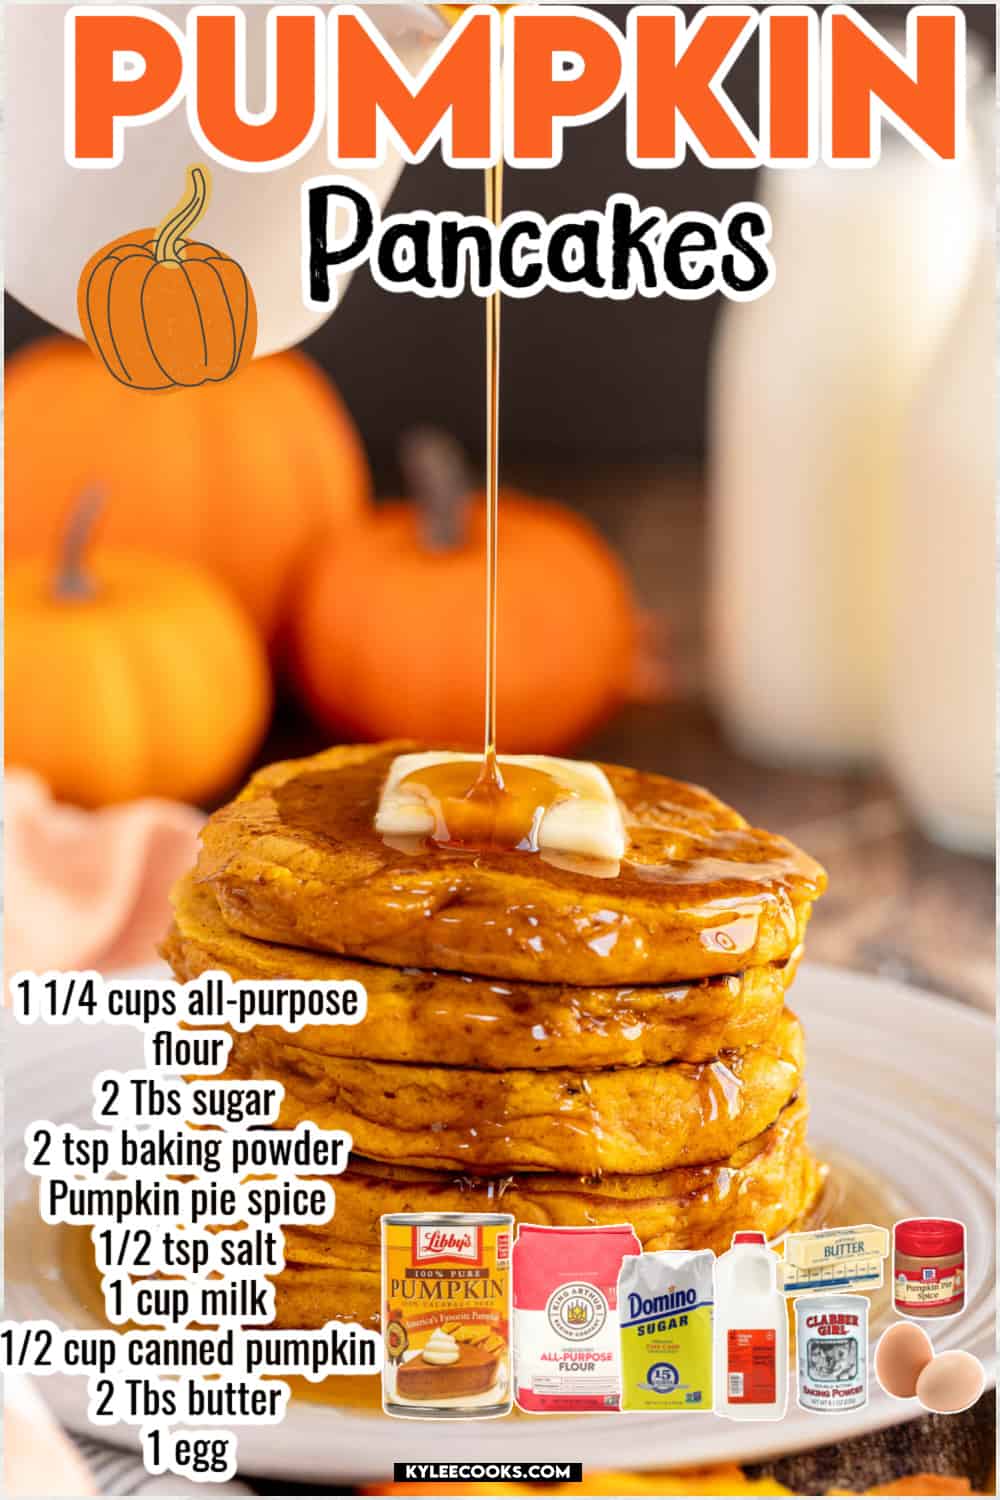 Pumpkin spice pancakes being drizzled with maple syrup, with ingredient images and recipe name overlaid in text.